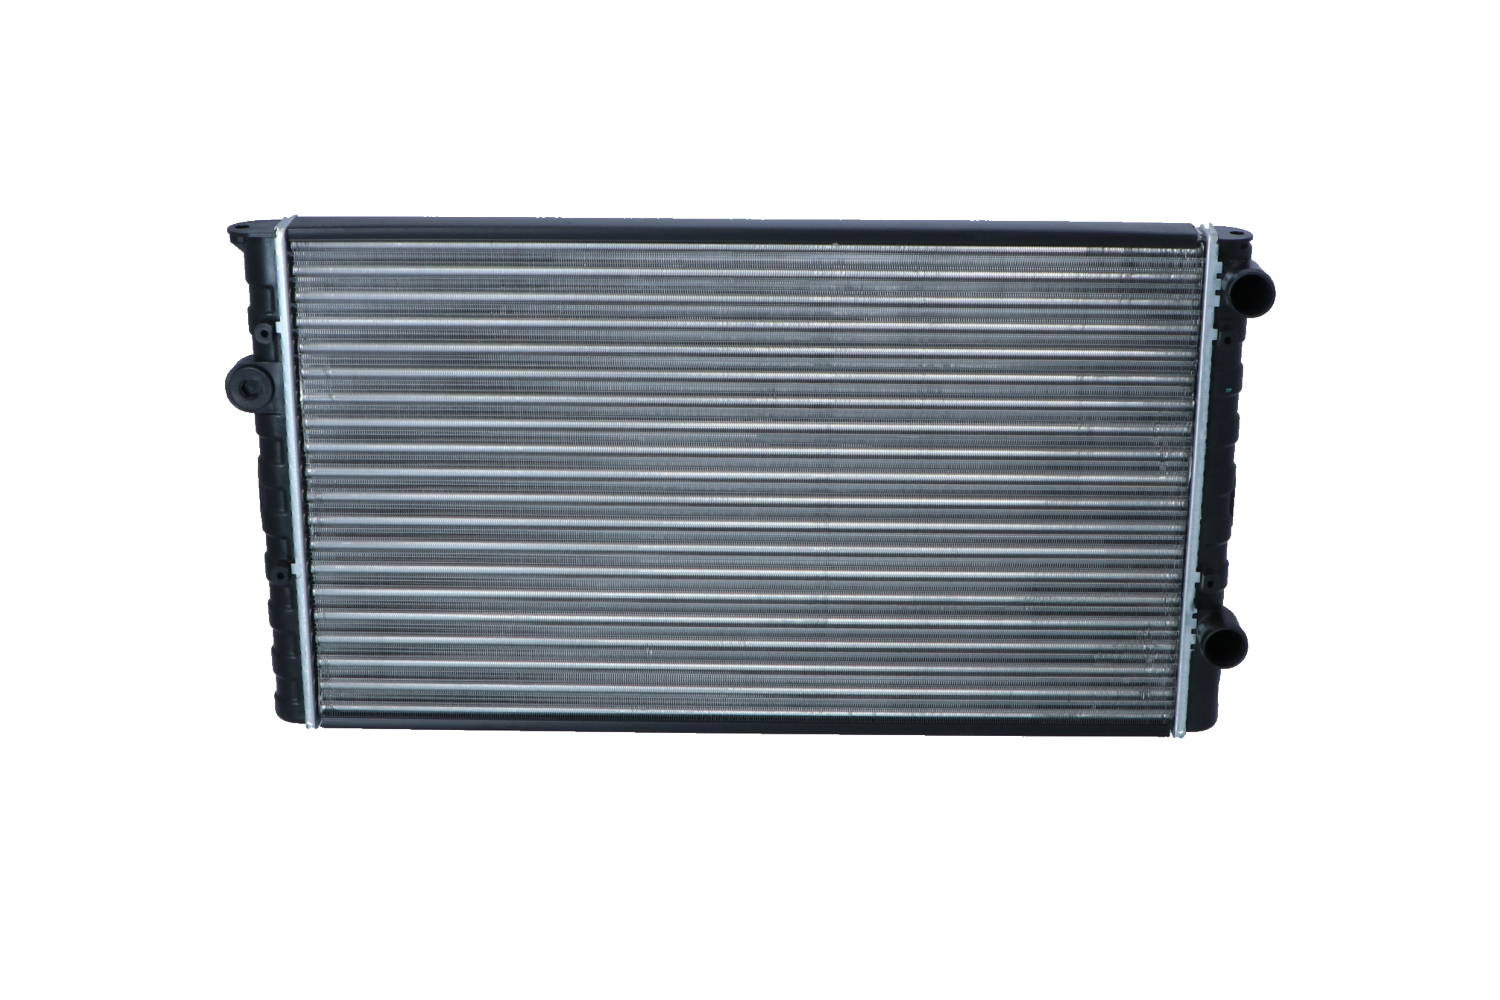 NRF Aluminium, 630 x 377 x 34 mm, Mechanically jointed cooling fins Radiator 50454 buy